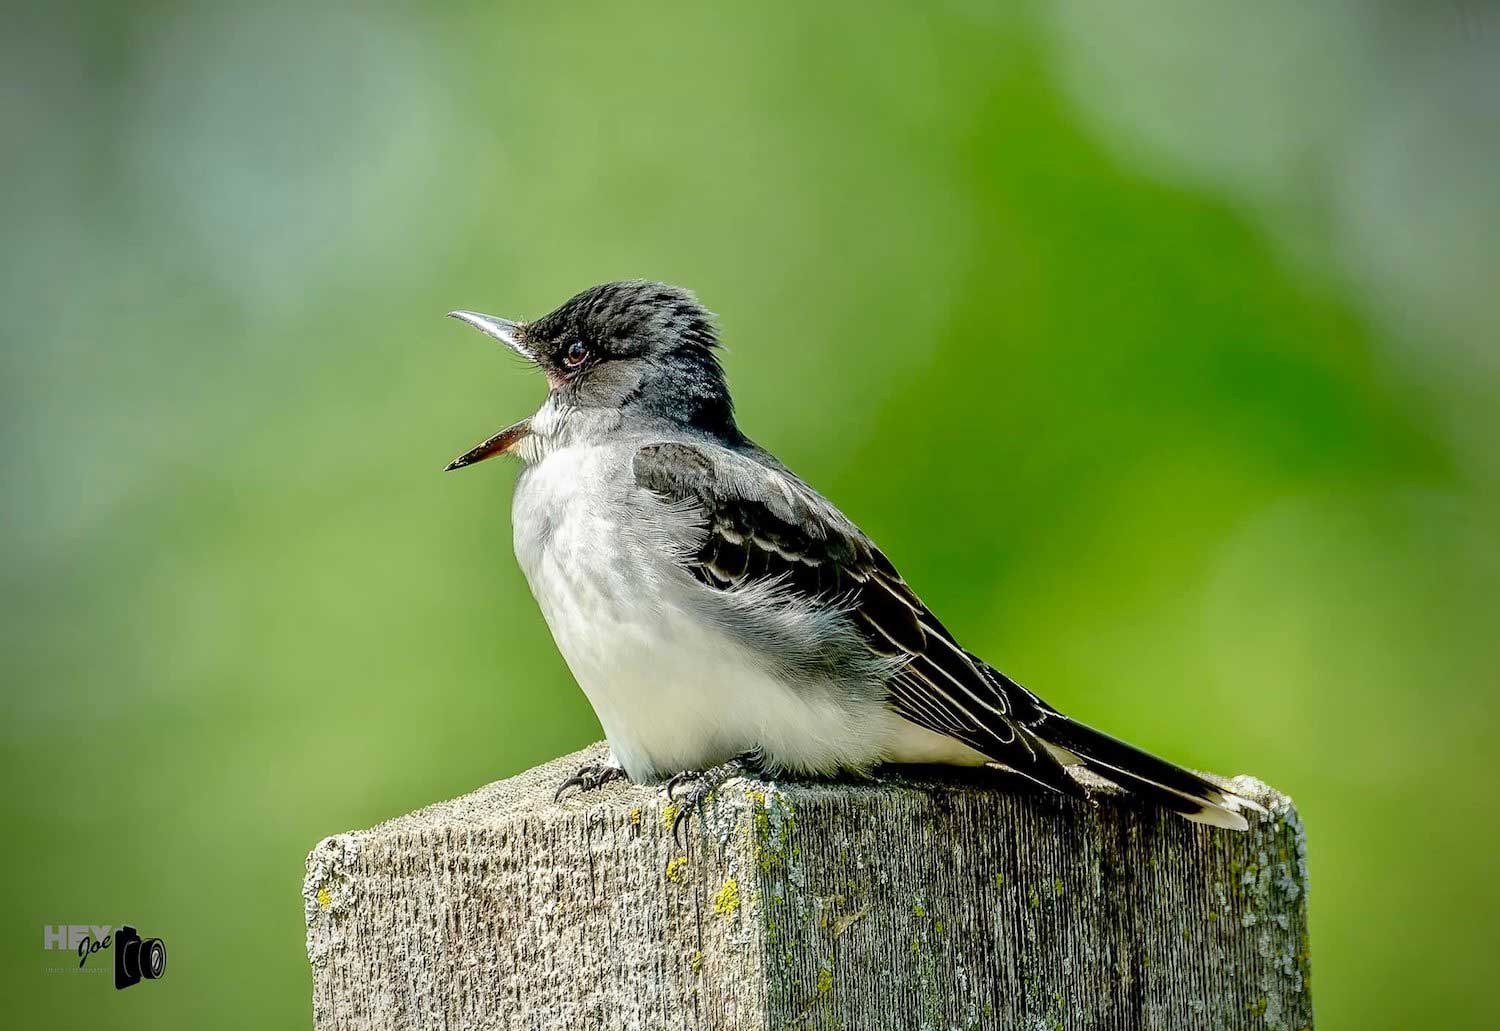 An eastern kingbird calling while perched on a wooden post.